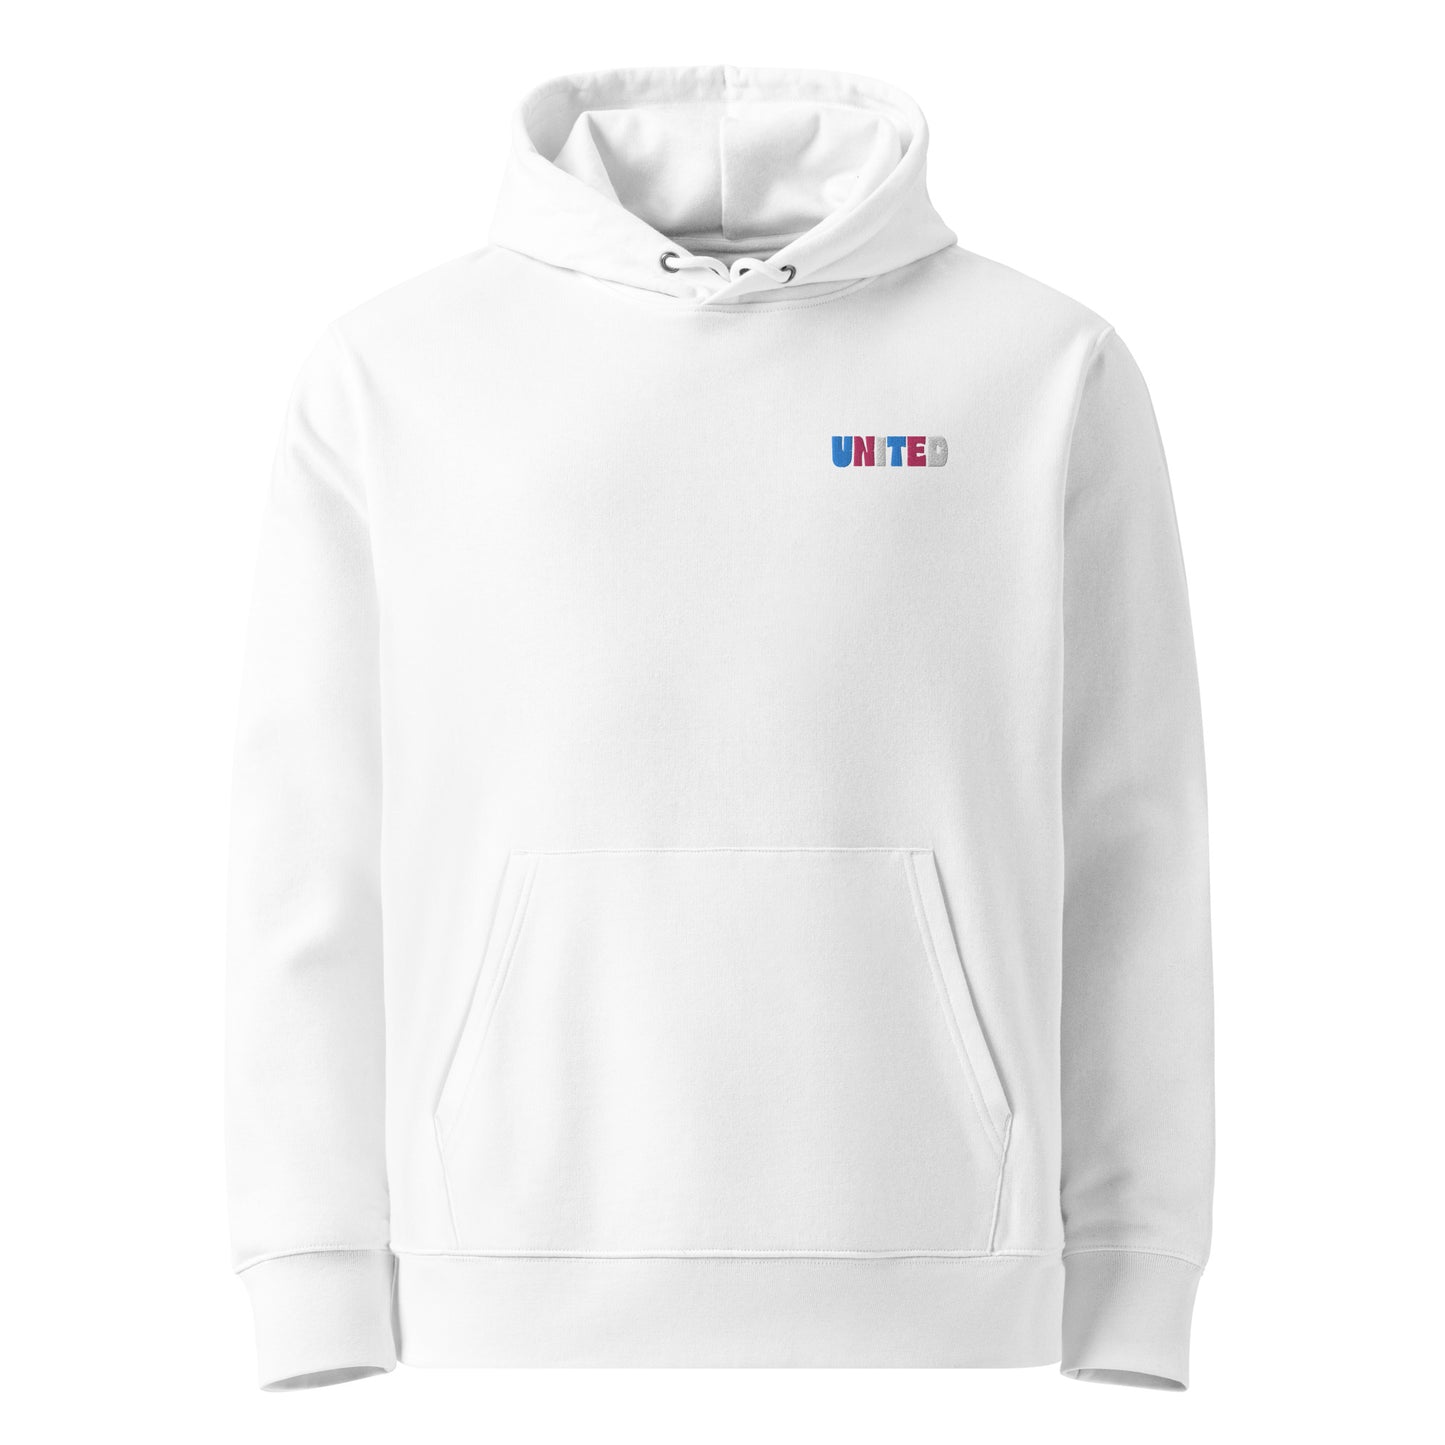 Unisex eco-friendly white hoodie featuring on the upper left chest; united embroidery in transgender pride colors, adding a touch of lgbtq to your outfit. sizes: small, medium, large, extra large, double extra large.